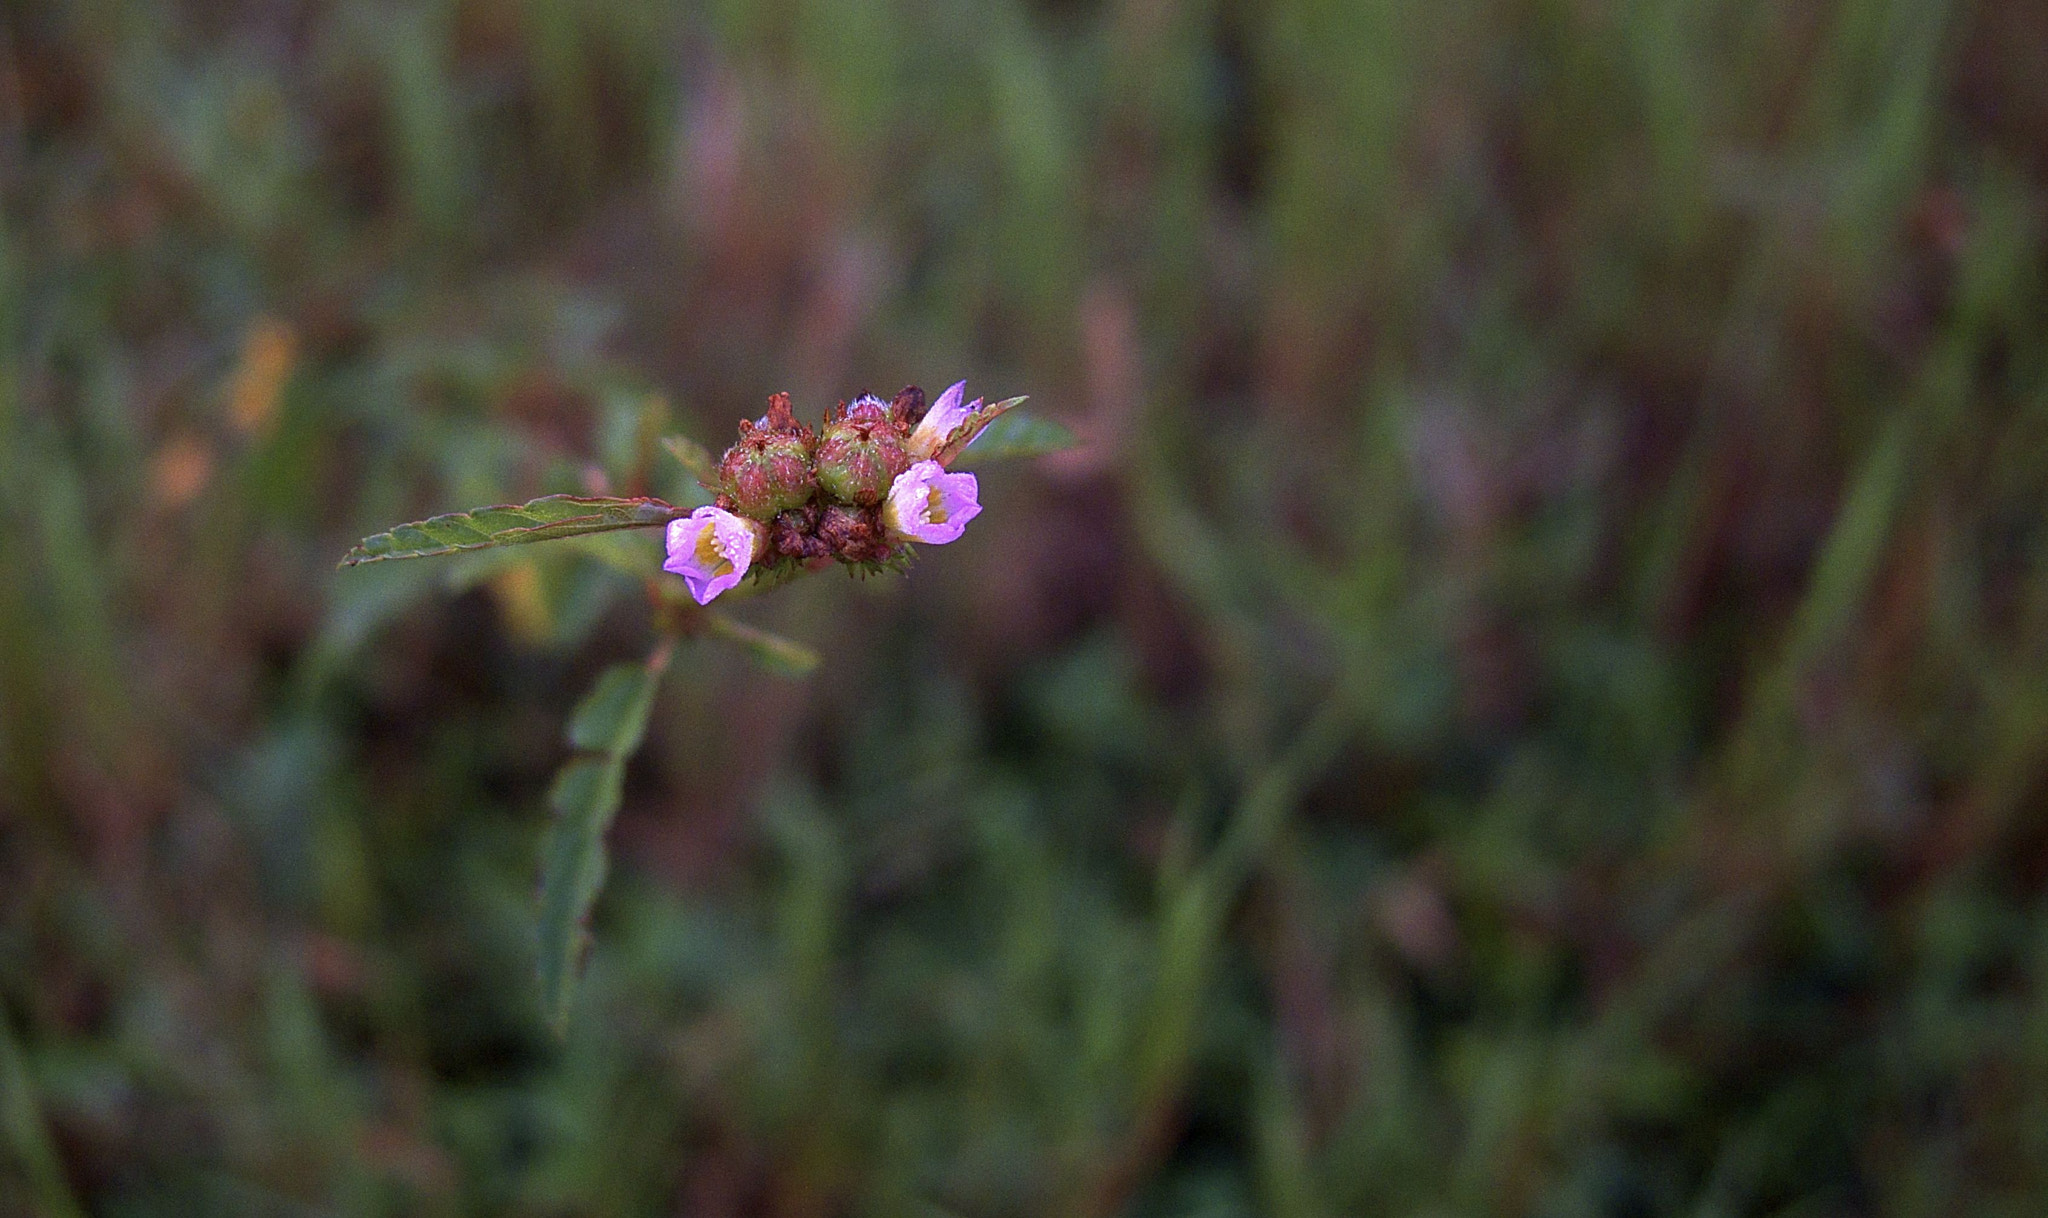 Pentax Q sample photo. Flower in the grass photography